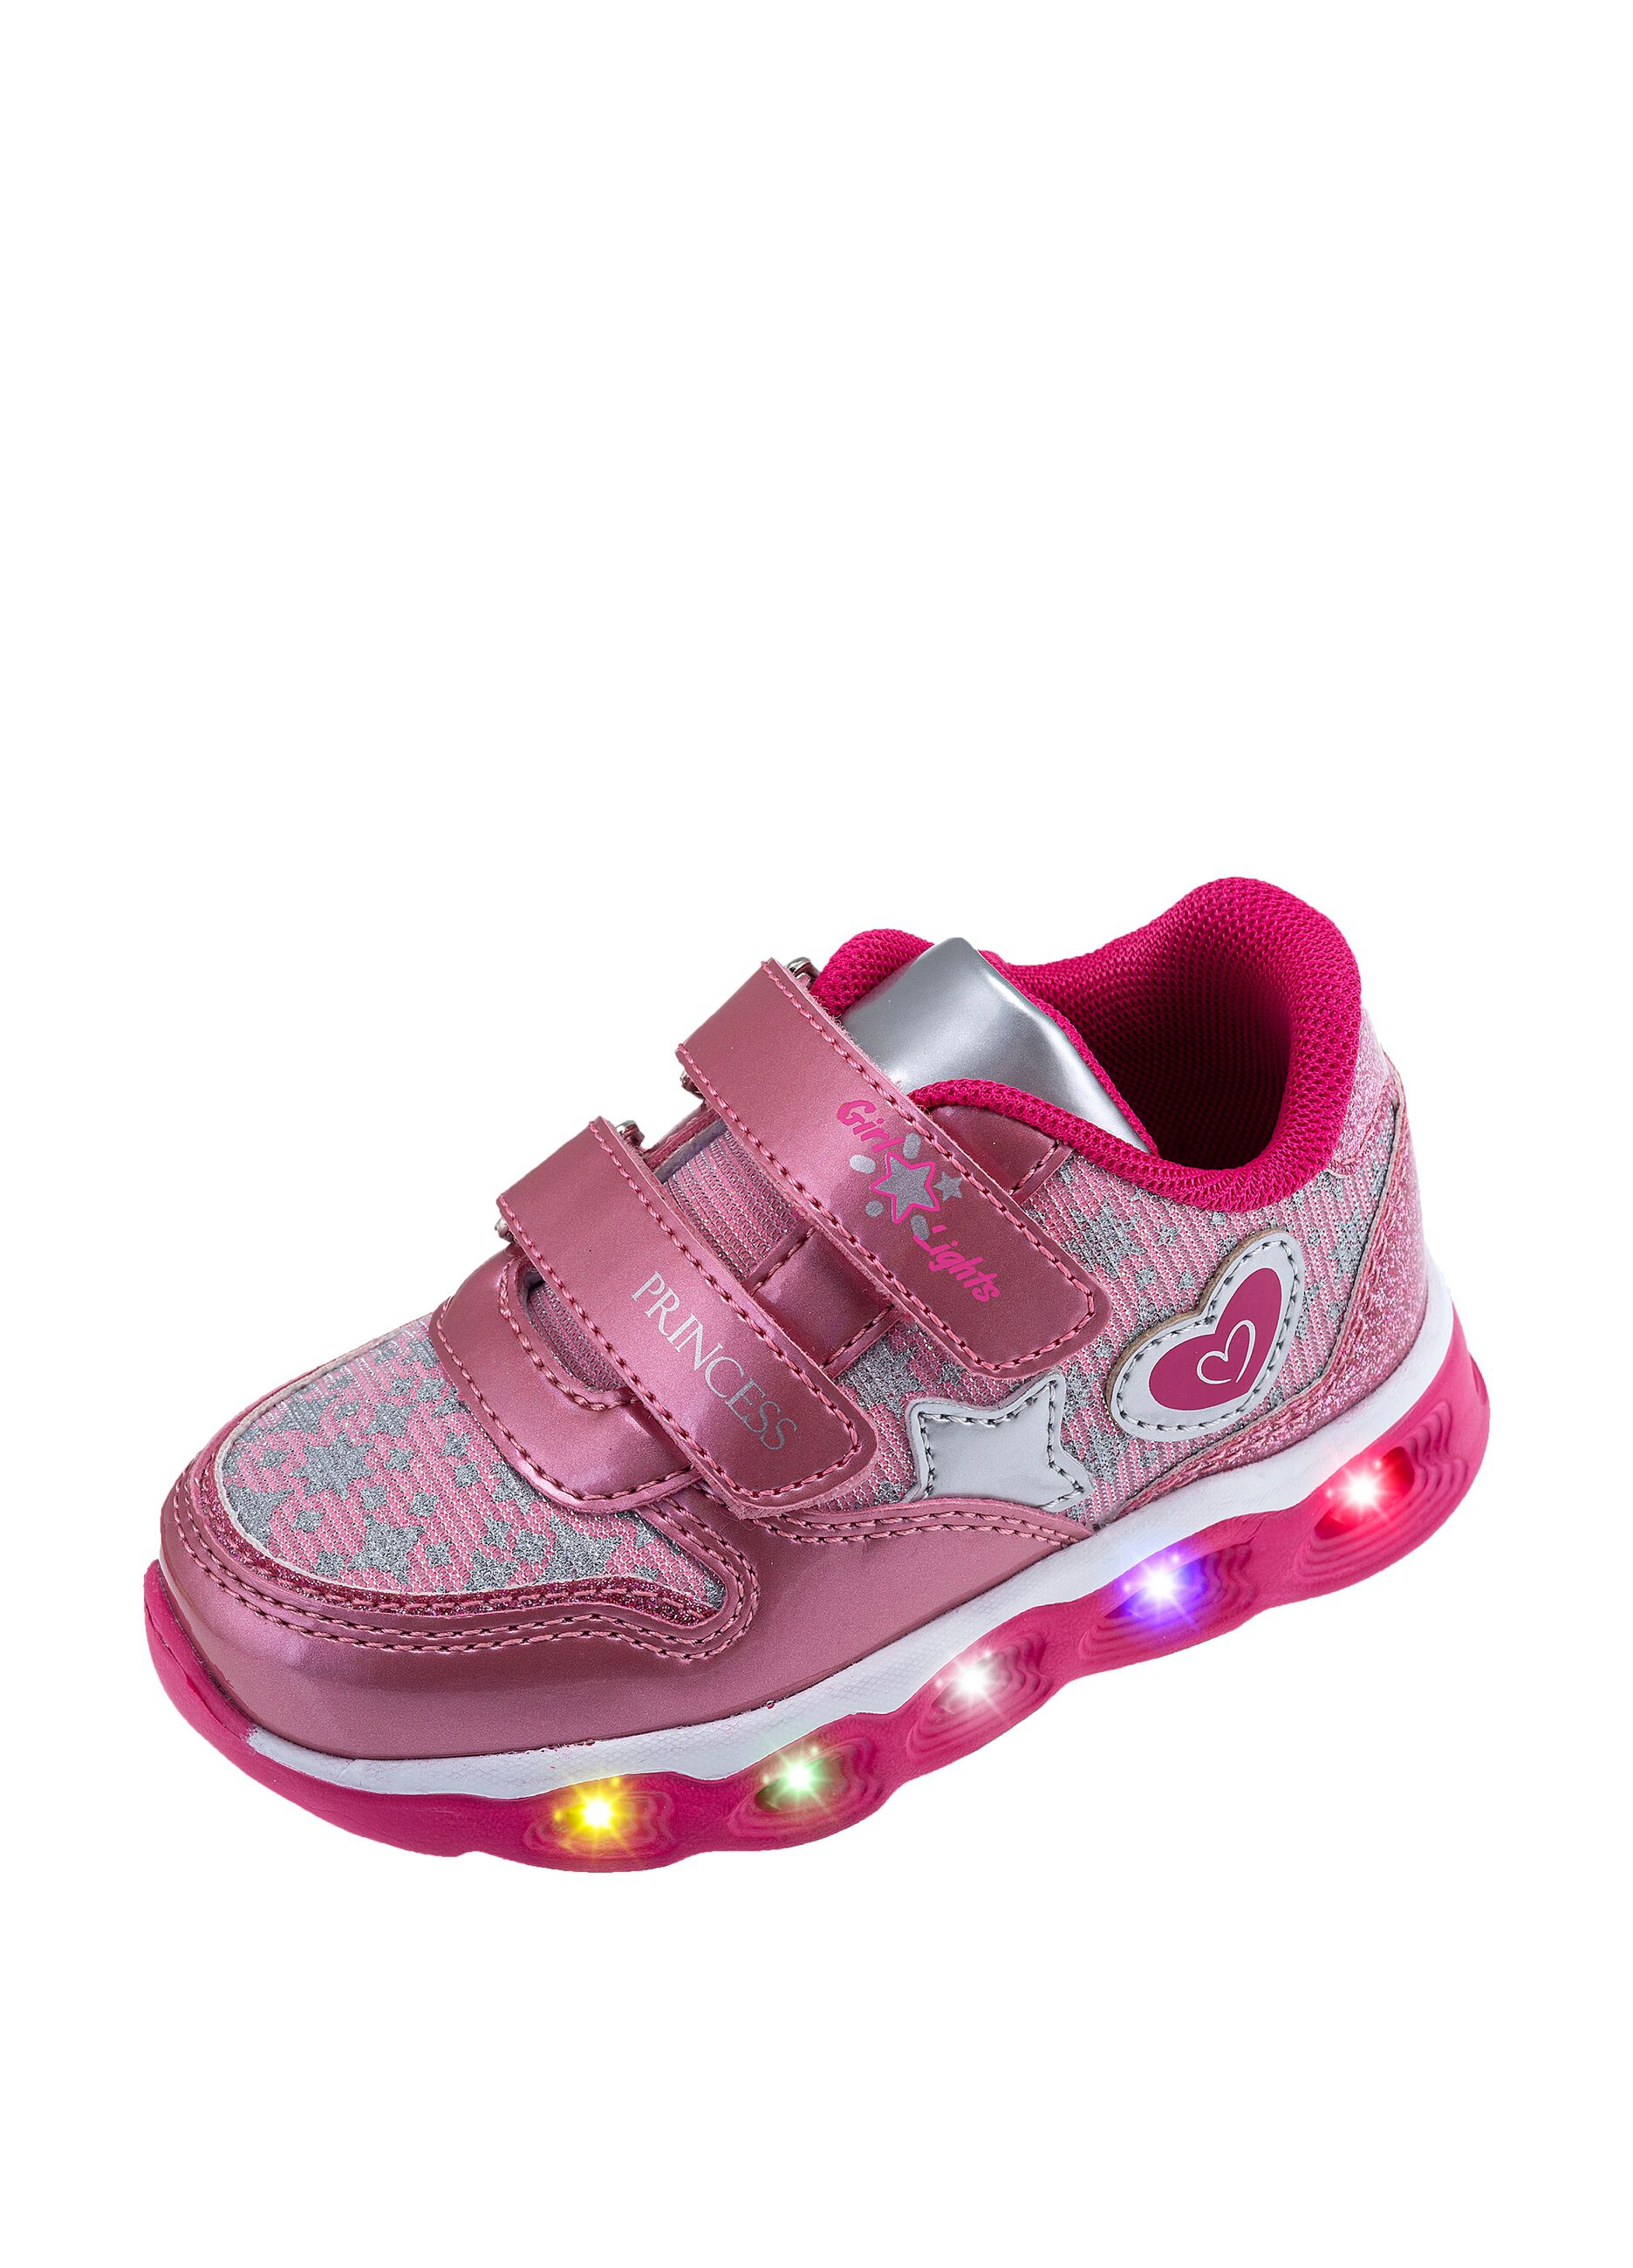 Chicco sneakers with lights